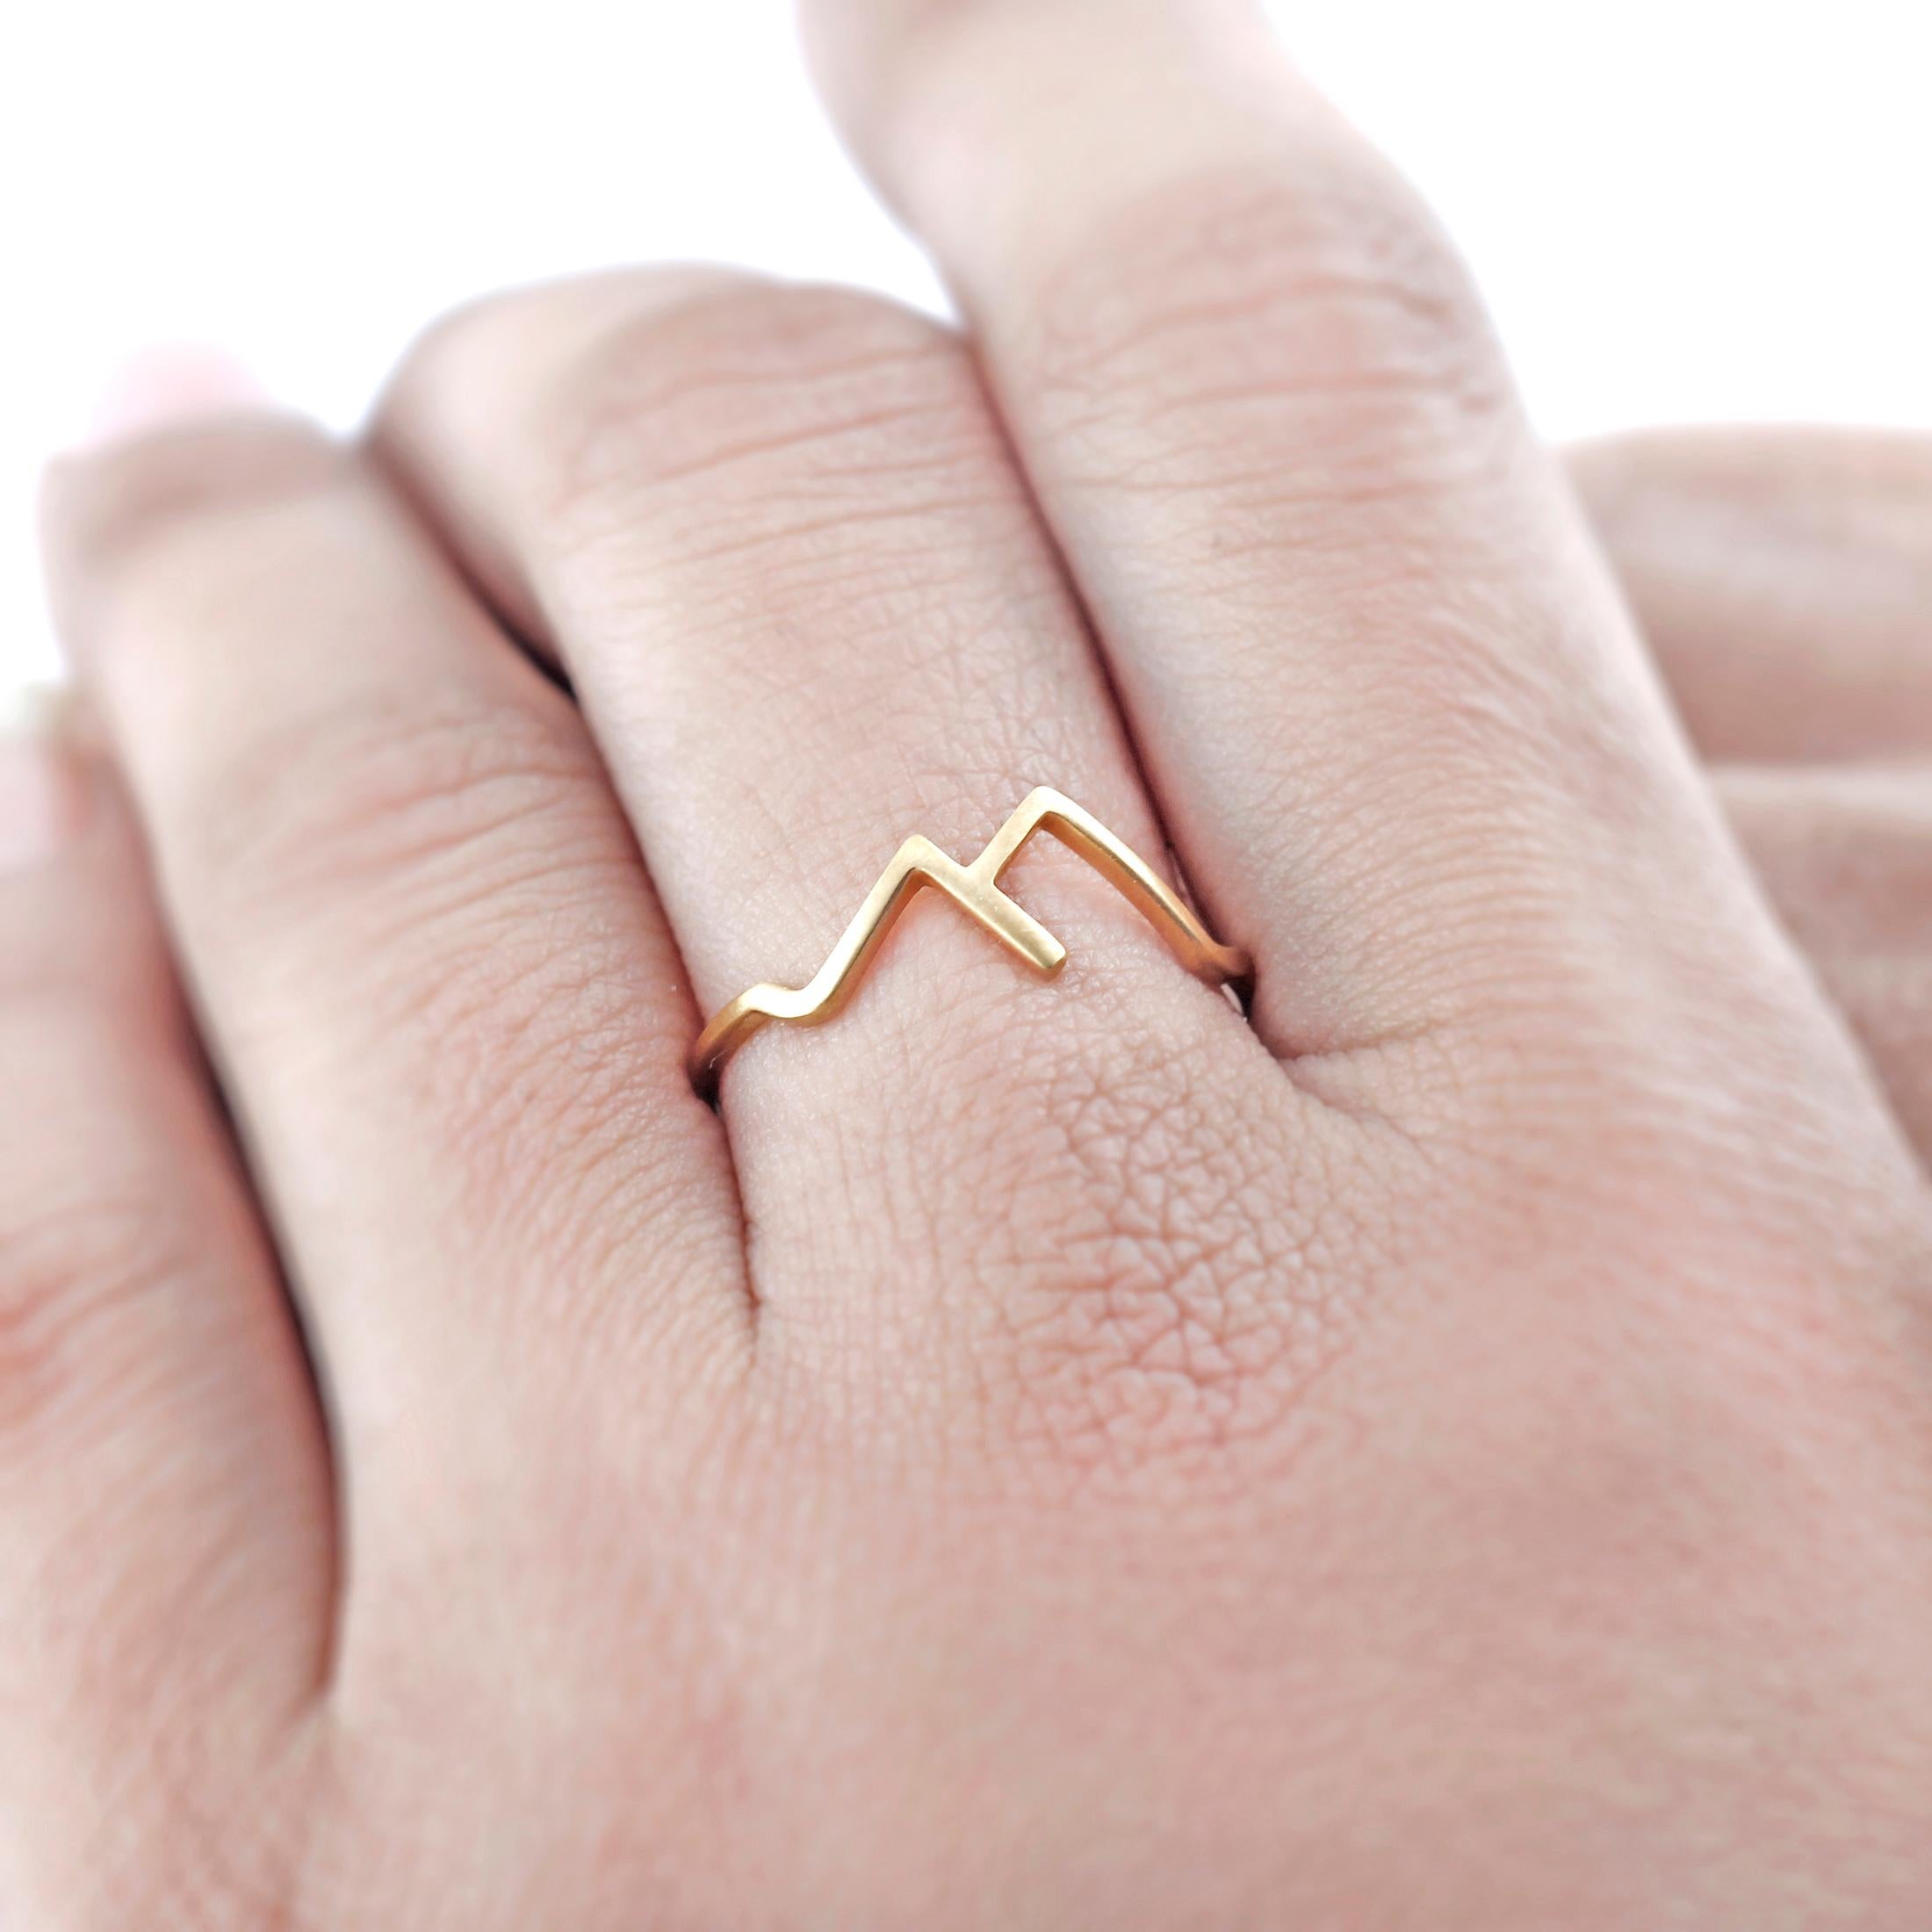 Artisan 18k Gold Ring, Love Ring Gold Stacking Rings Gold Ring, Dainty Ring Minimalist For Sale